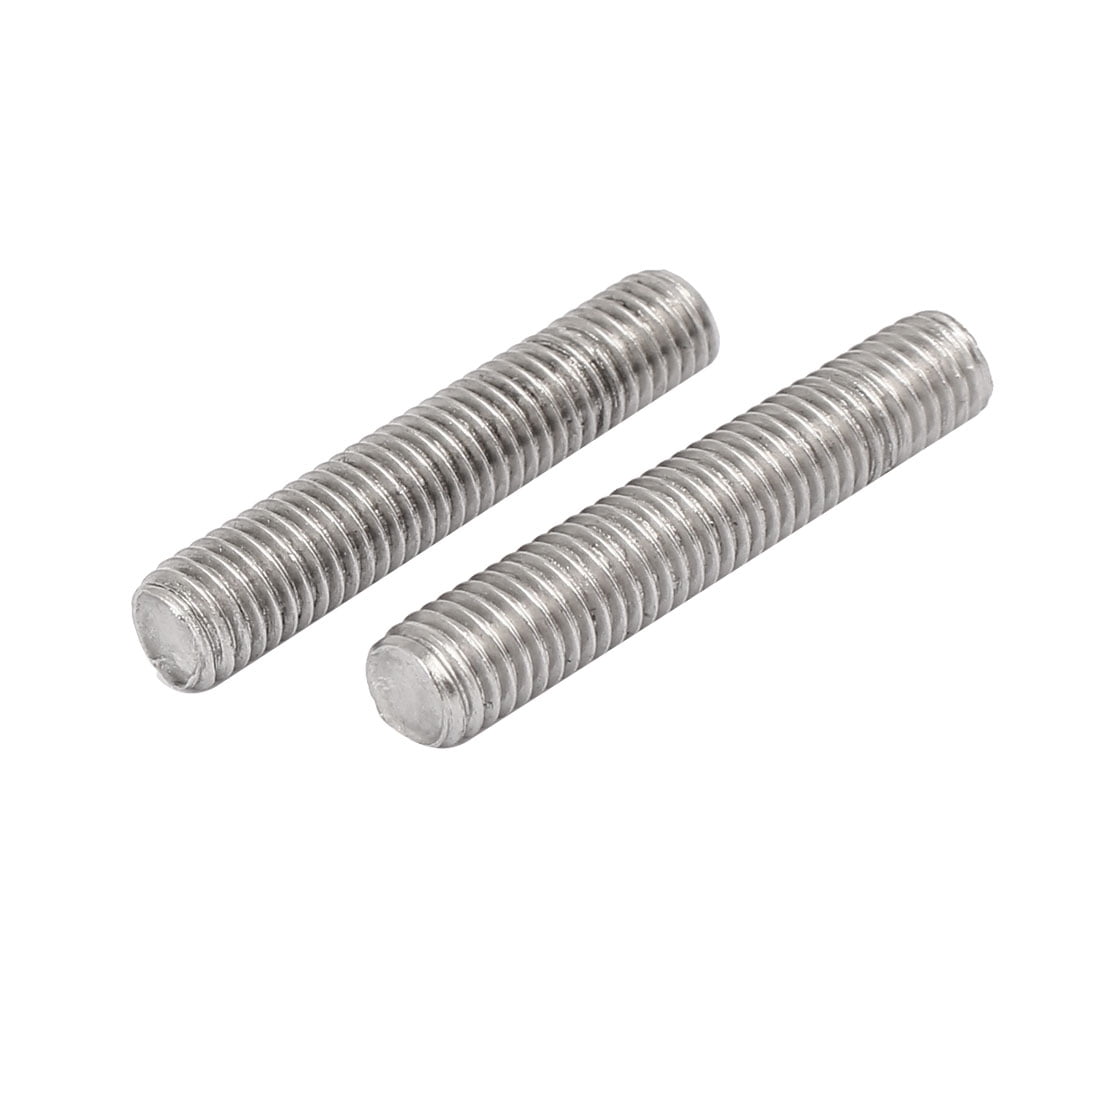 M4 x 45mm 304 Stainless Steel Fully Threaded Rod Bar Studs Silver Tone 20 Pcs 